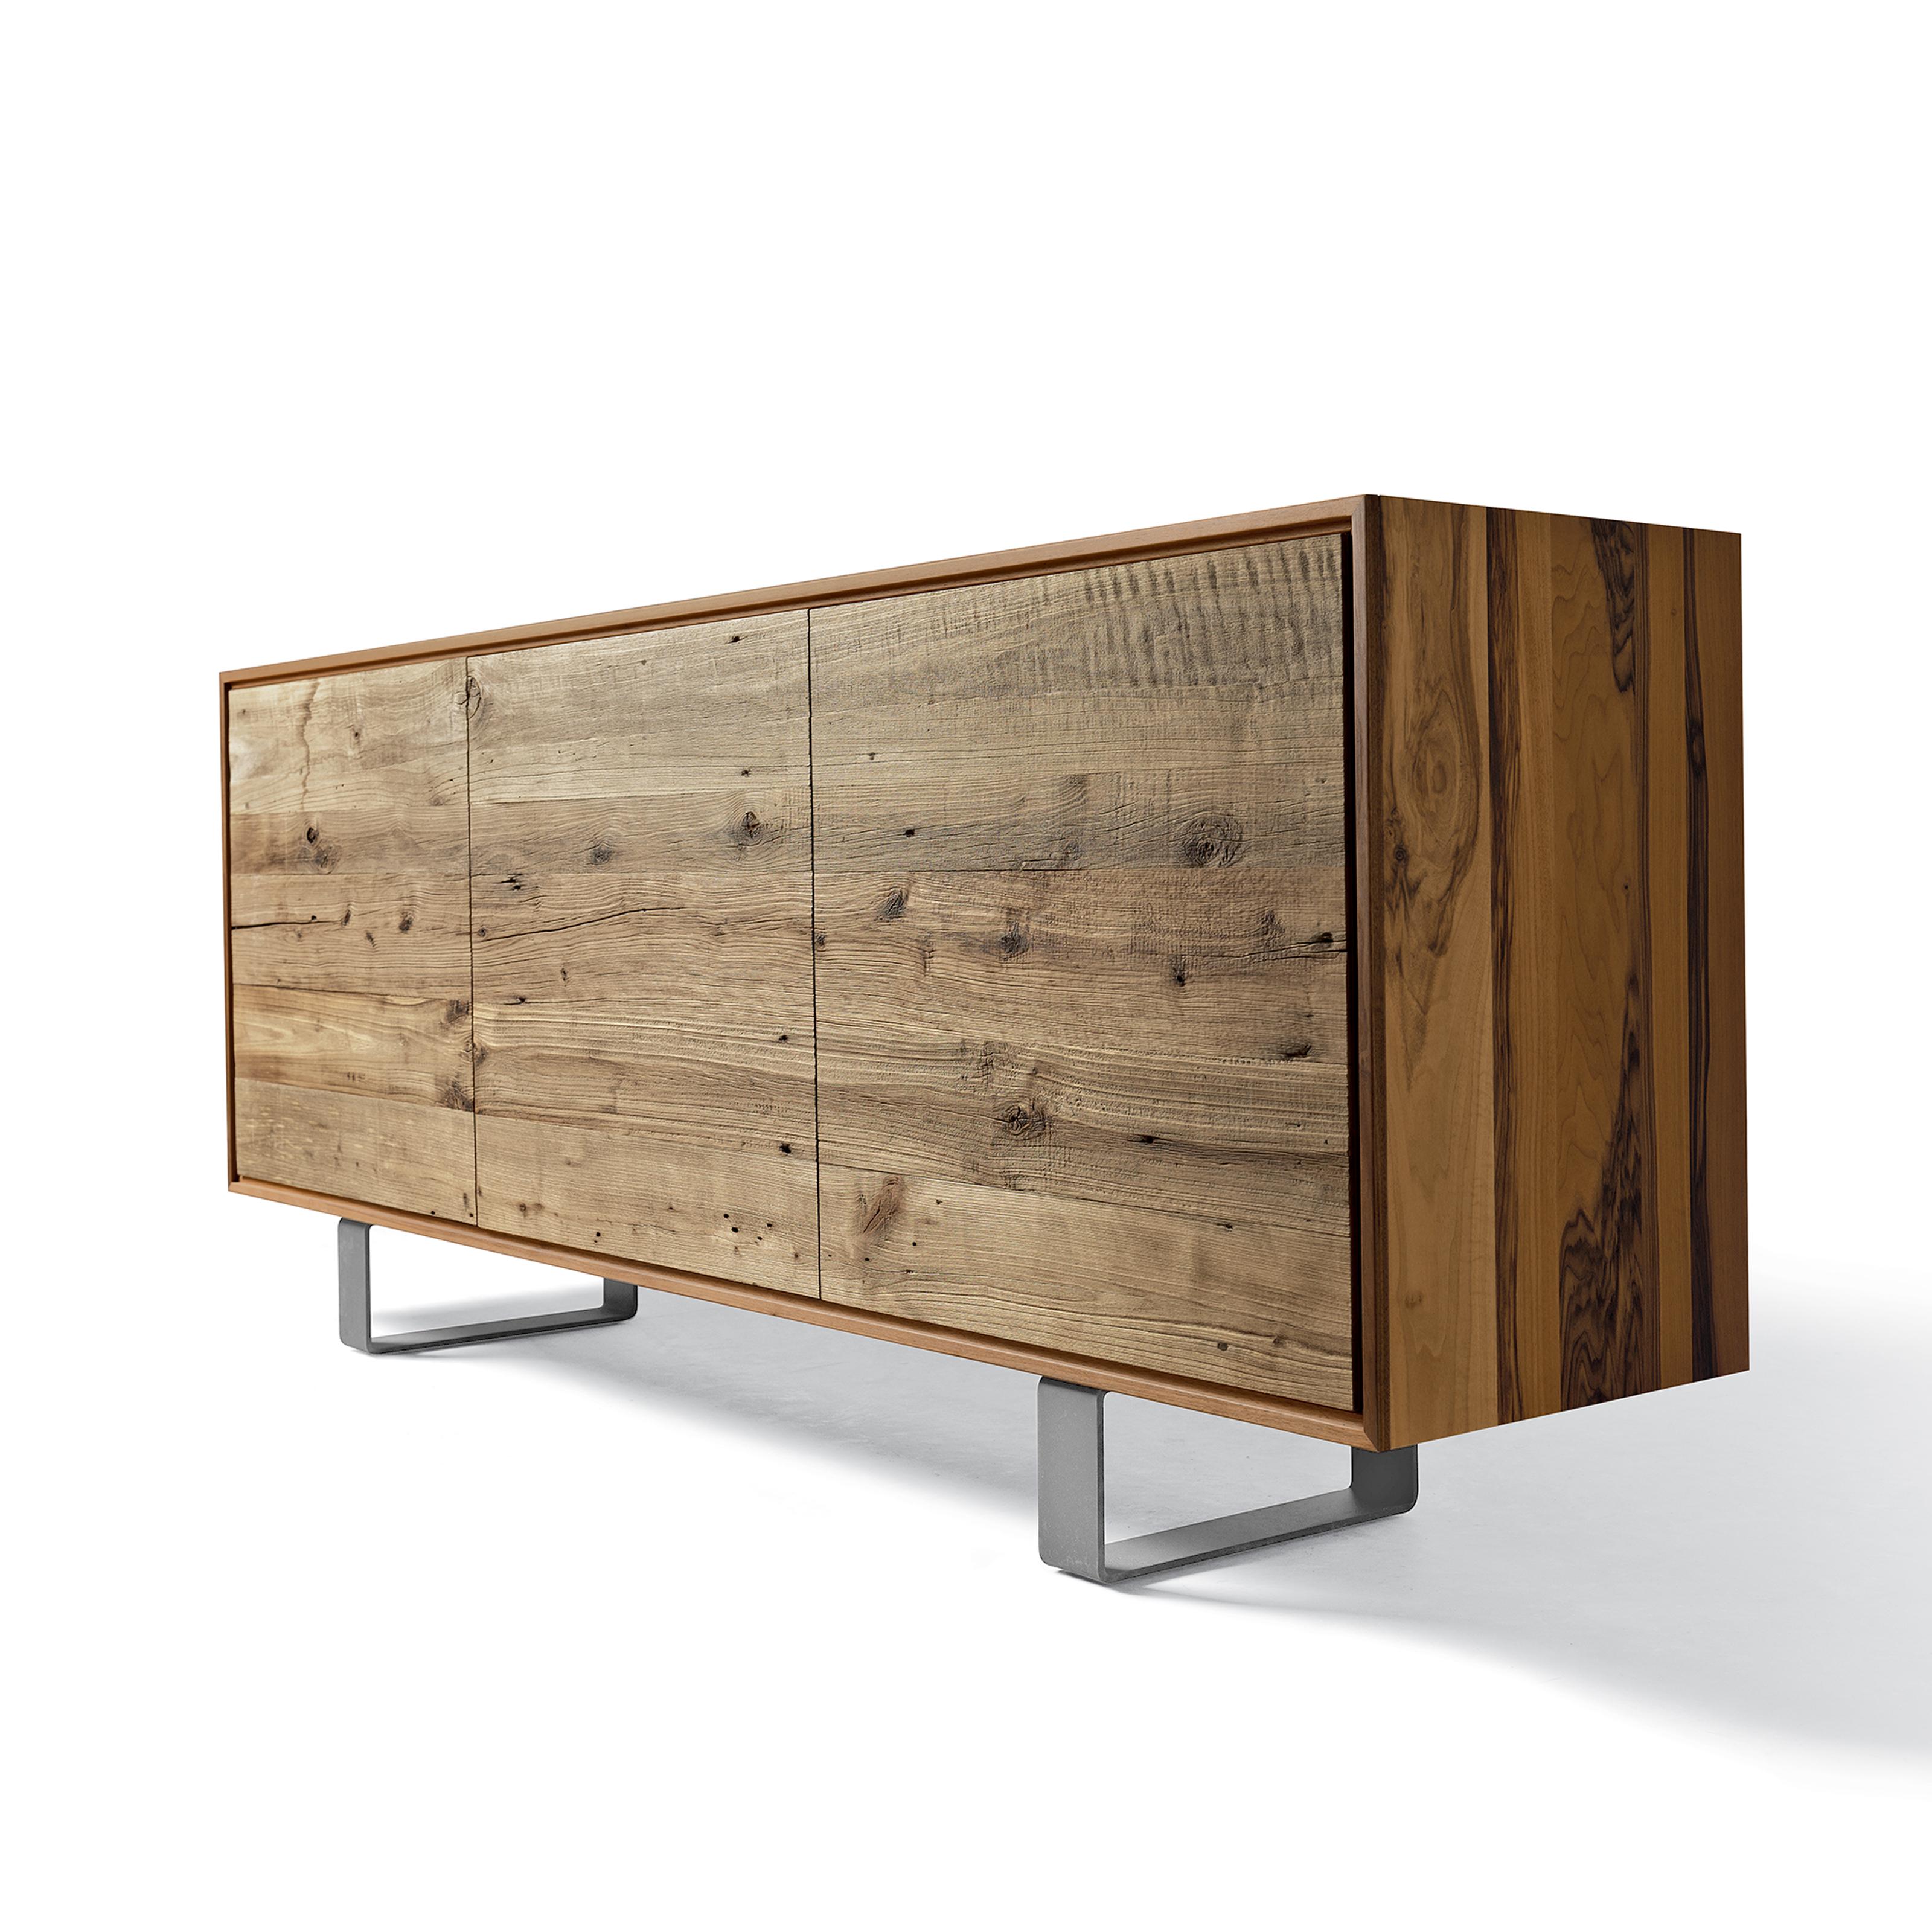 Completely designed and made in Italy, this sideboard it’s an expression of fine Italian craftsmanship. Handcrafted with passion and skills and finished by hand in every detail. The result is a contemporary piece designed to elegantly complete any